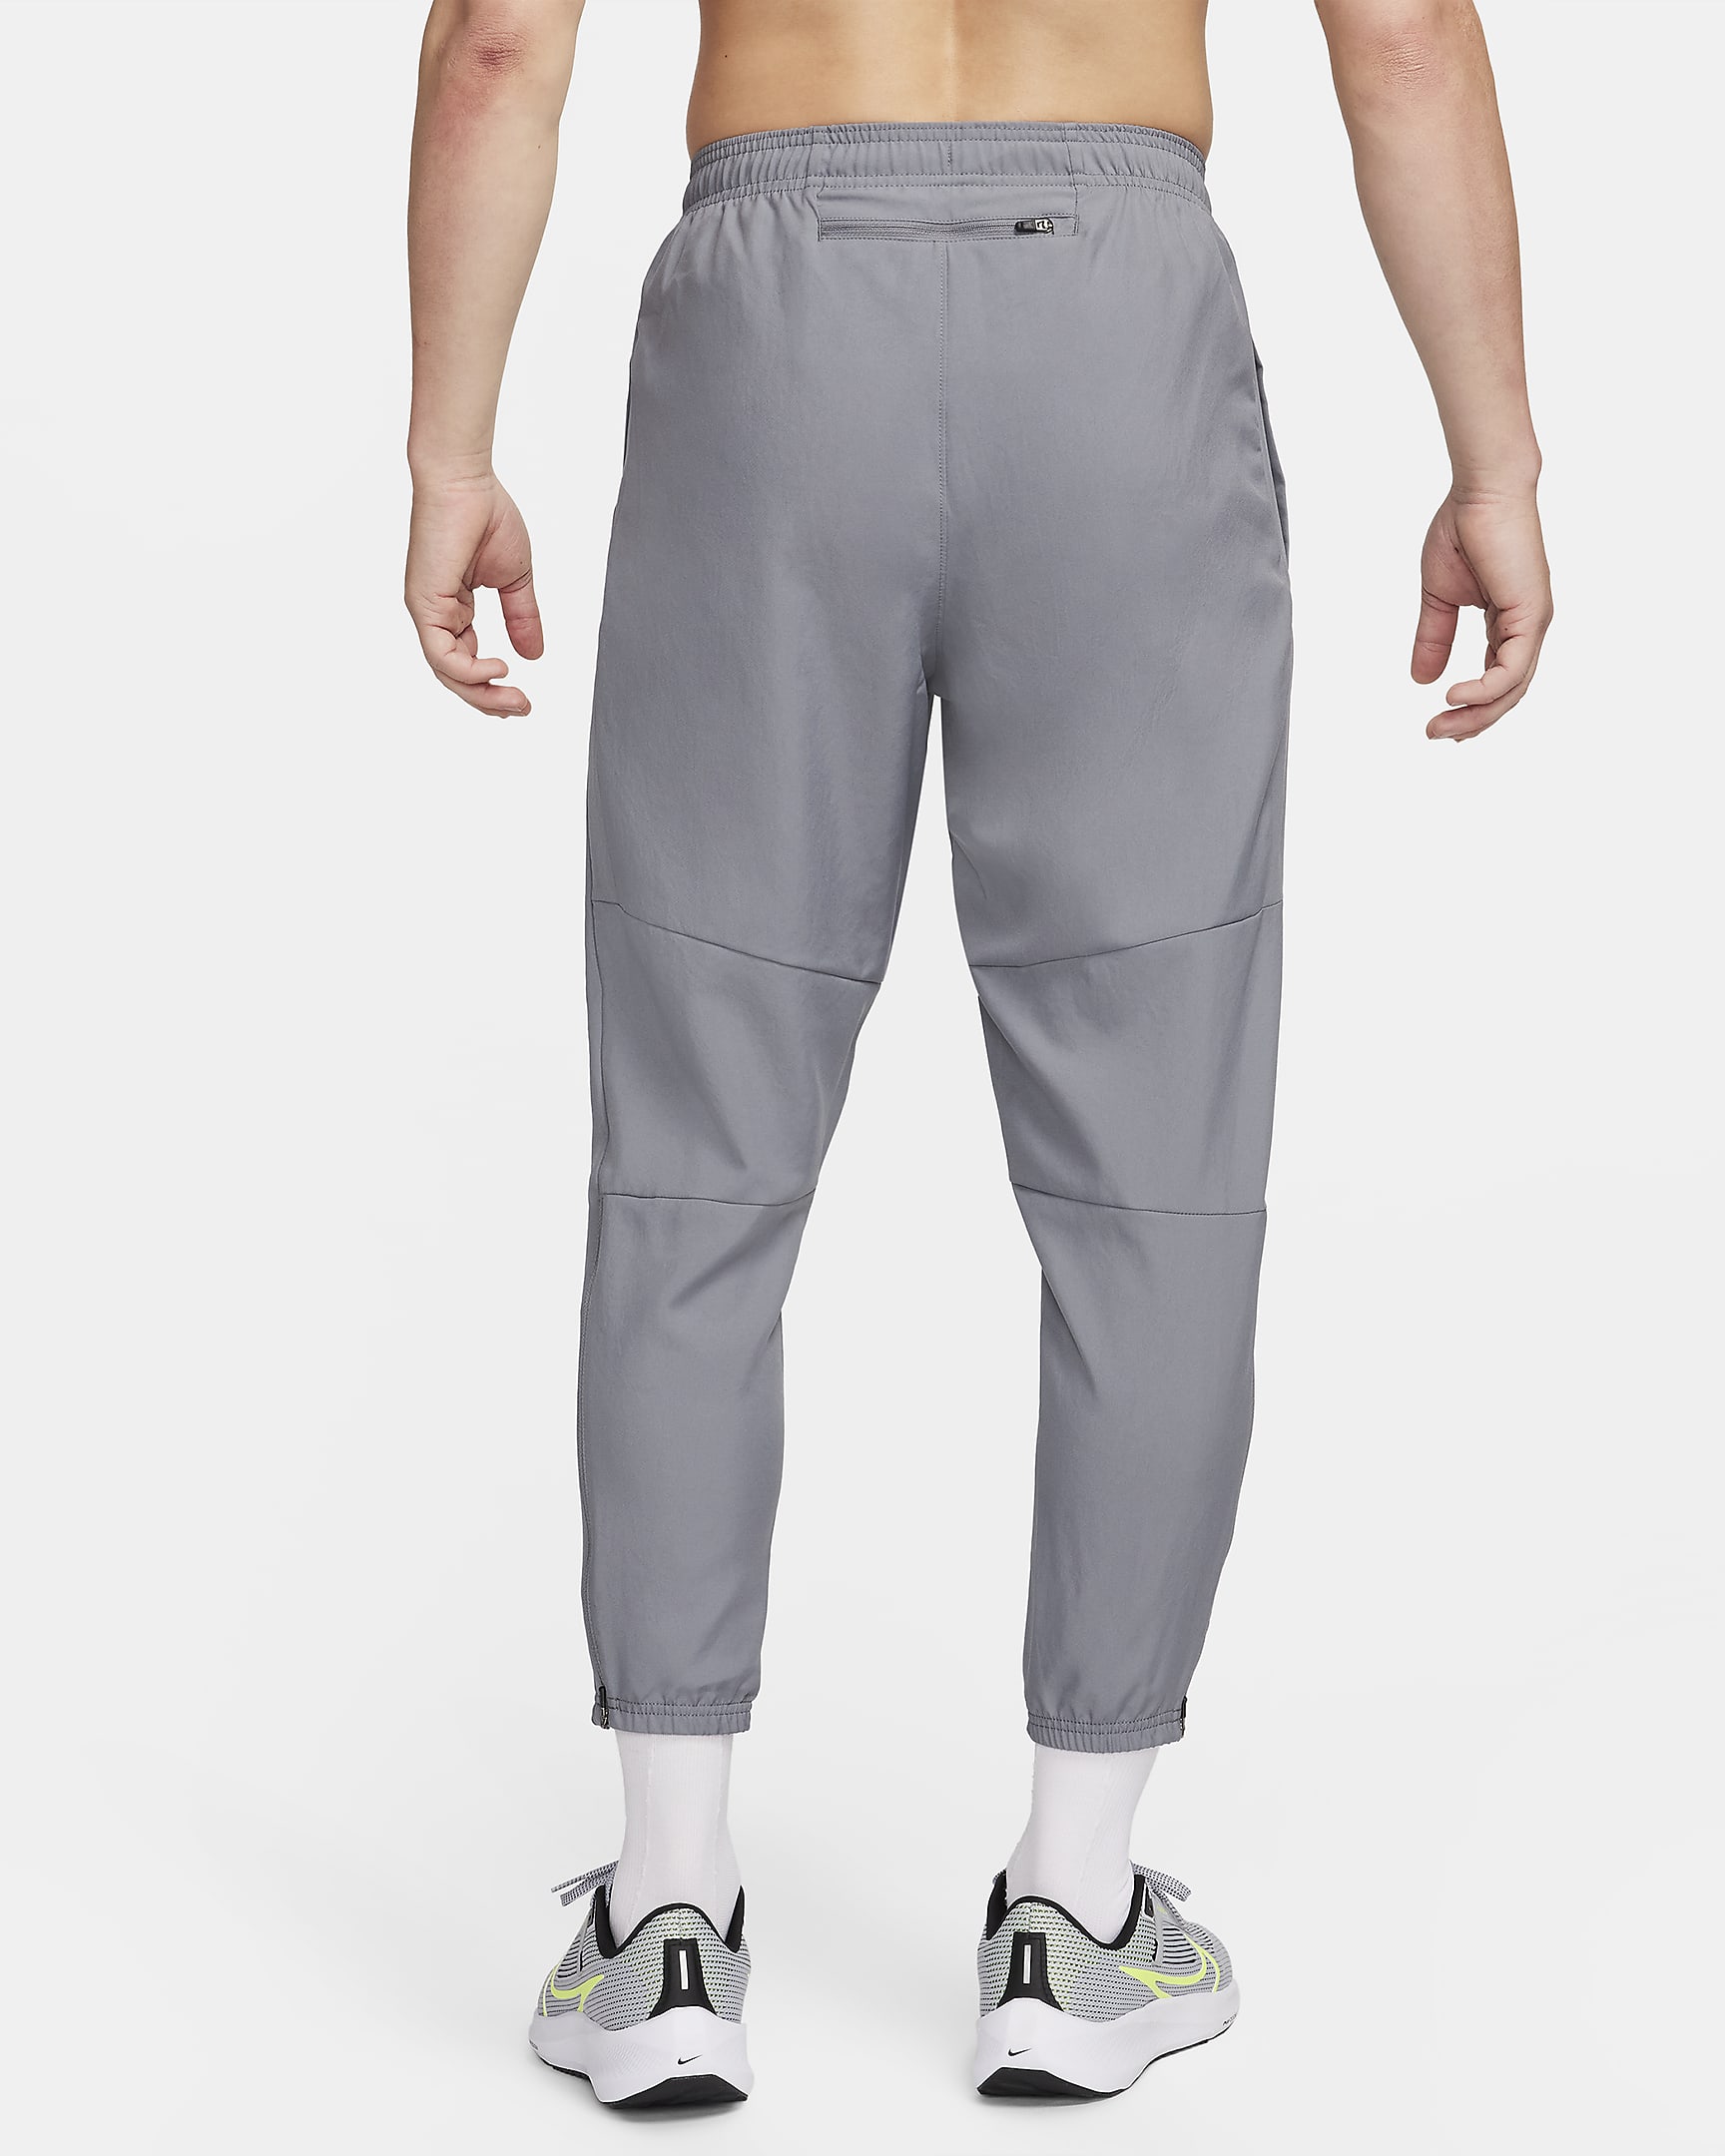 Nike Challenger Men's Dri-FIT Woven Running Trousers. Nike ID